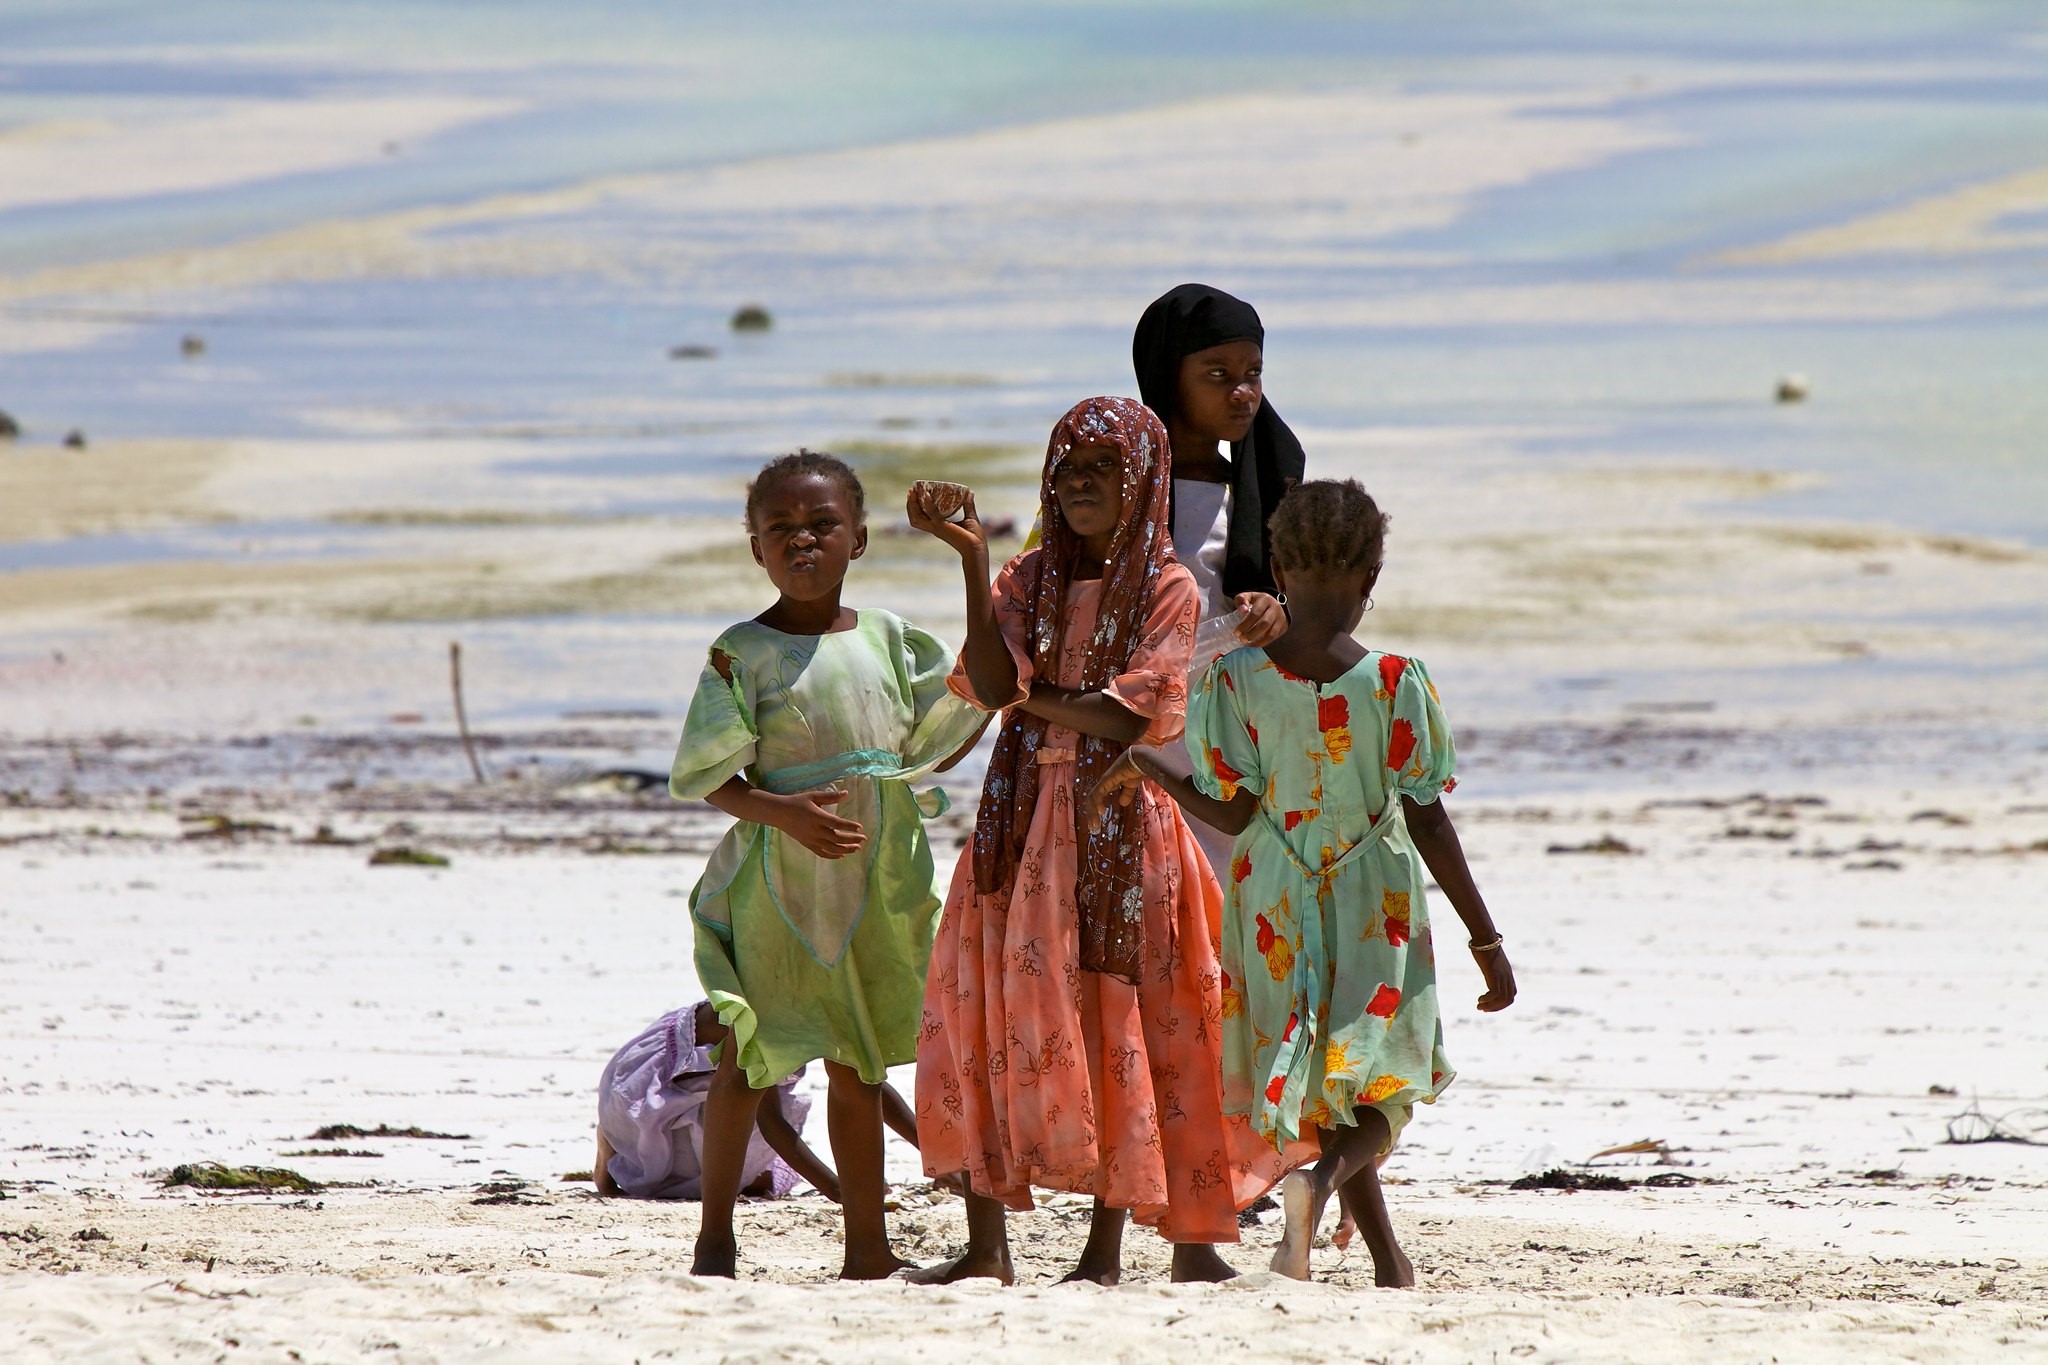 causes of poverty in tanzania essay